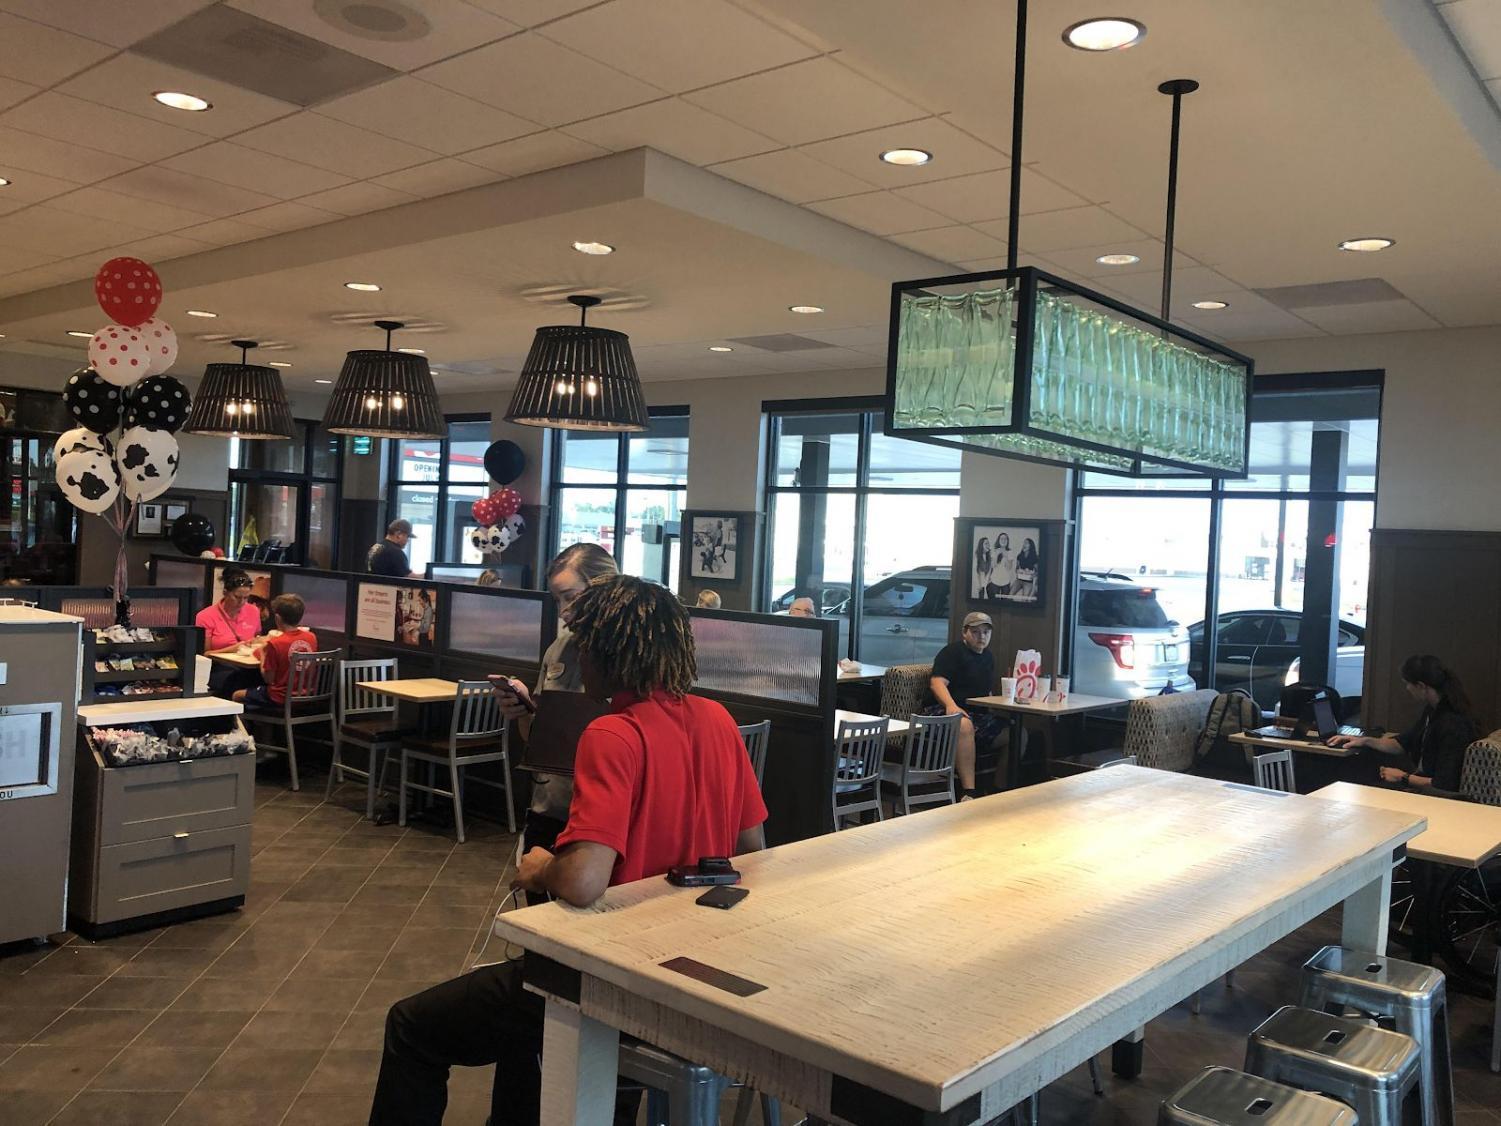 Reopening+of+Chick-fil-a+Statesboro+draws+crowd